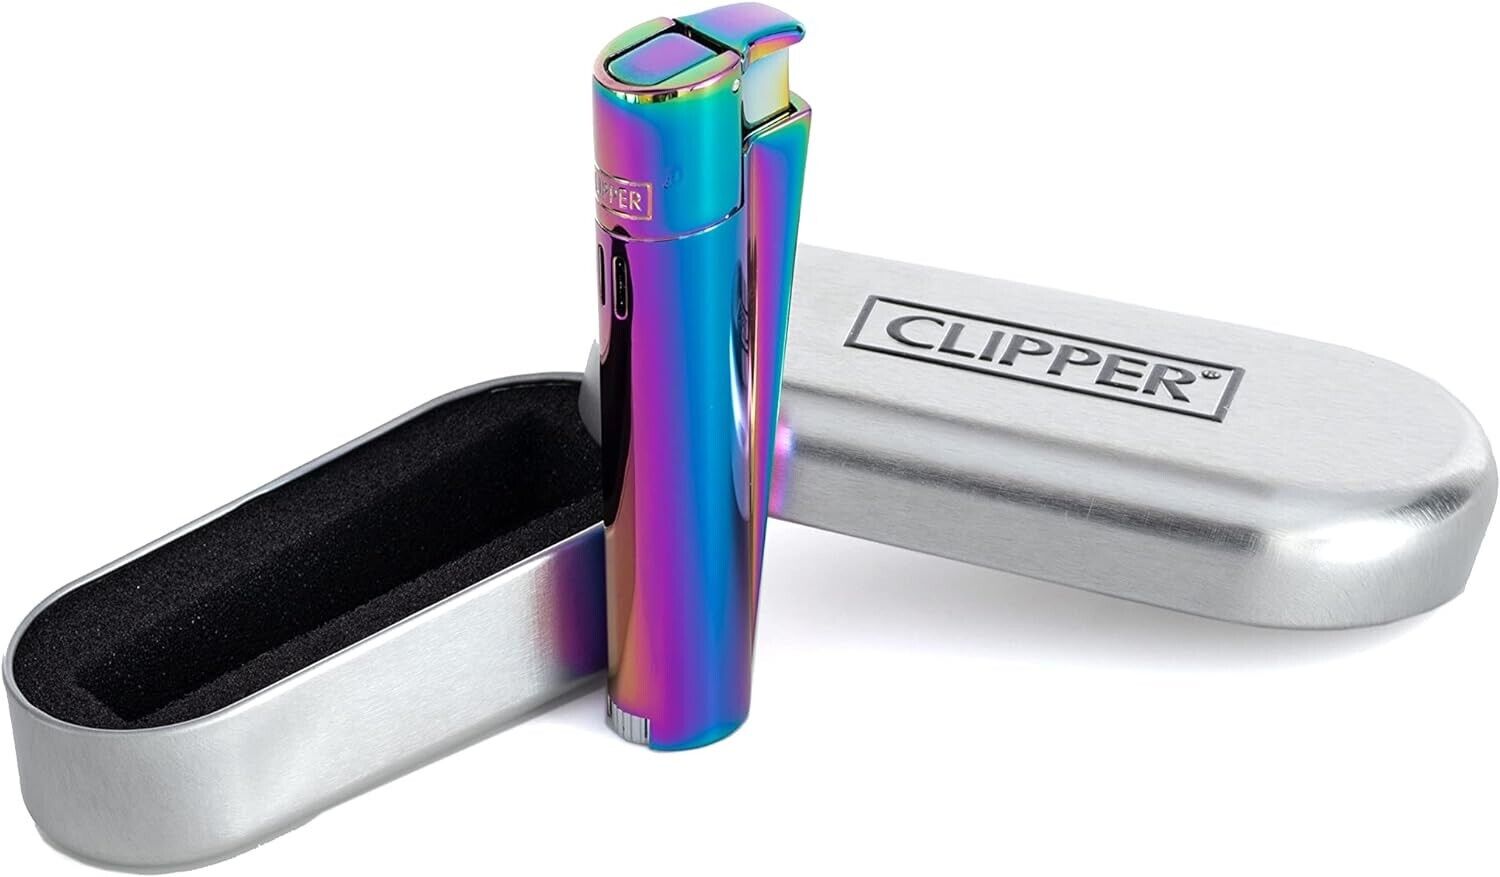 Clipper Metal ELECTRONIC JET FLAME Refilla0ble (ICY) Lighter With Gift Box